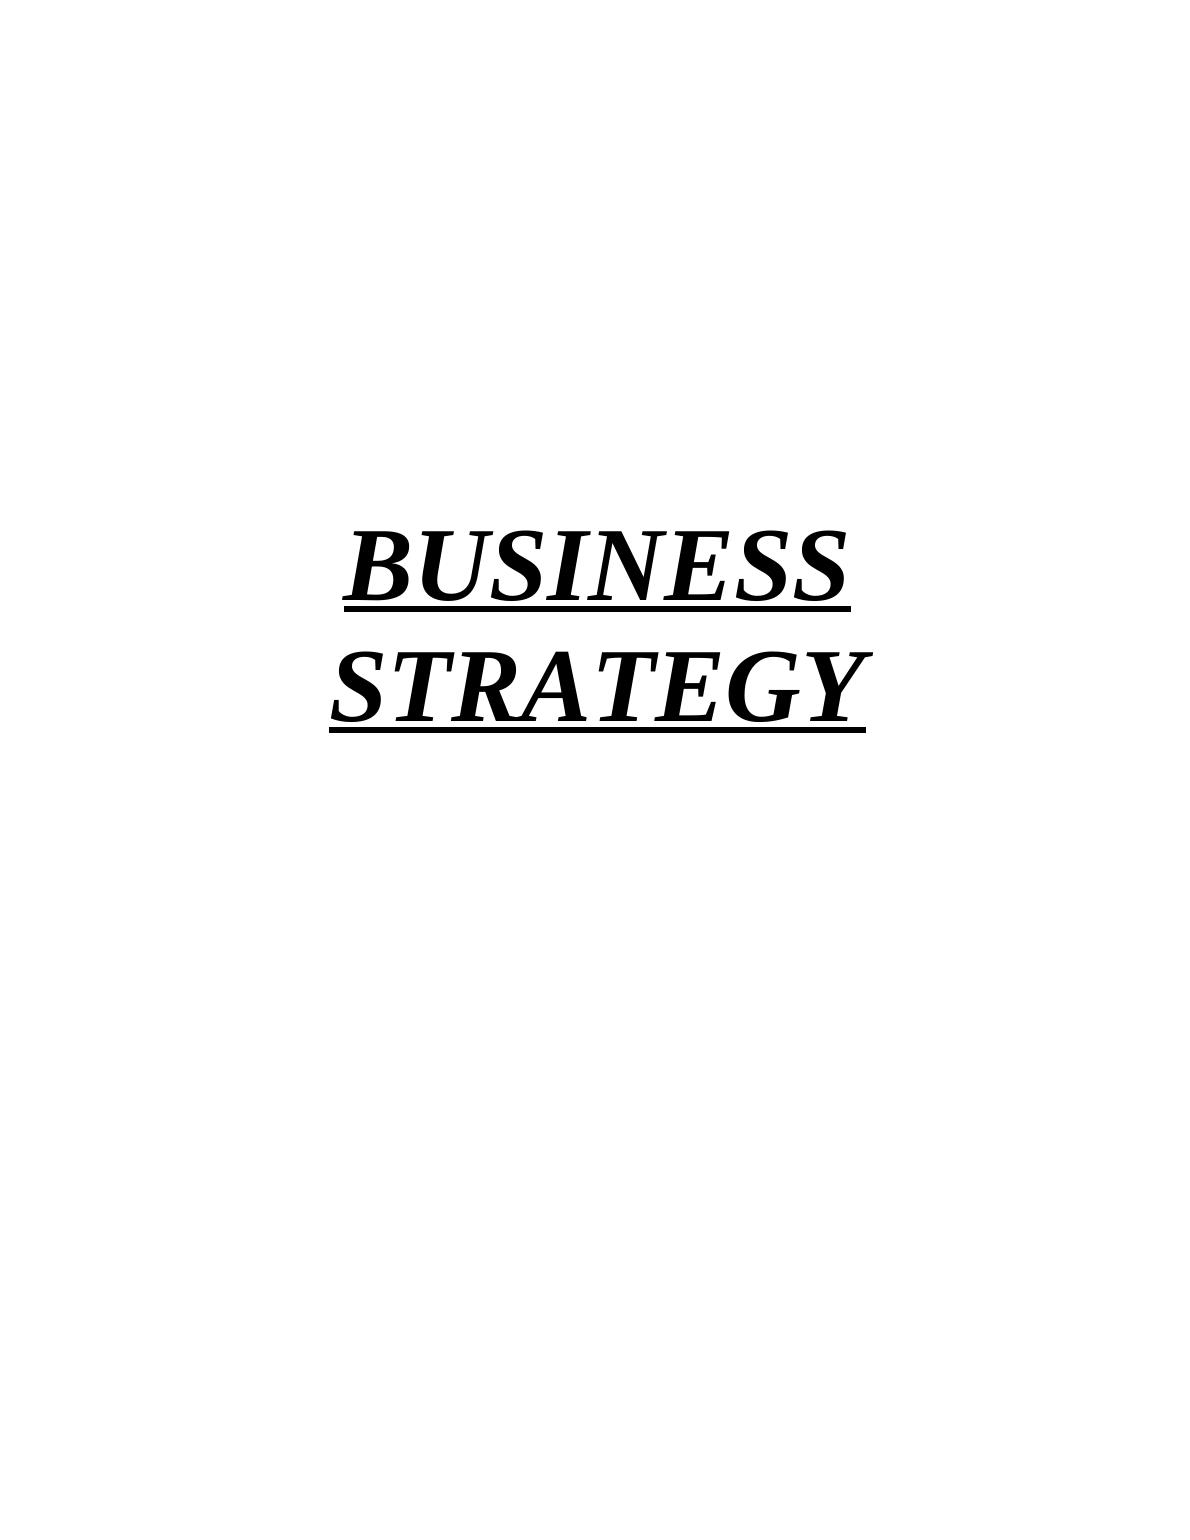 Business Strategy - John Lewis_1